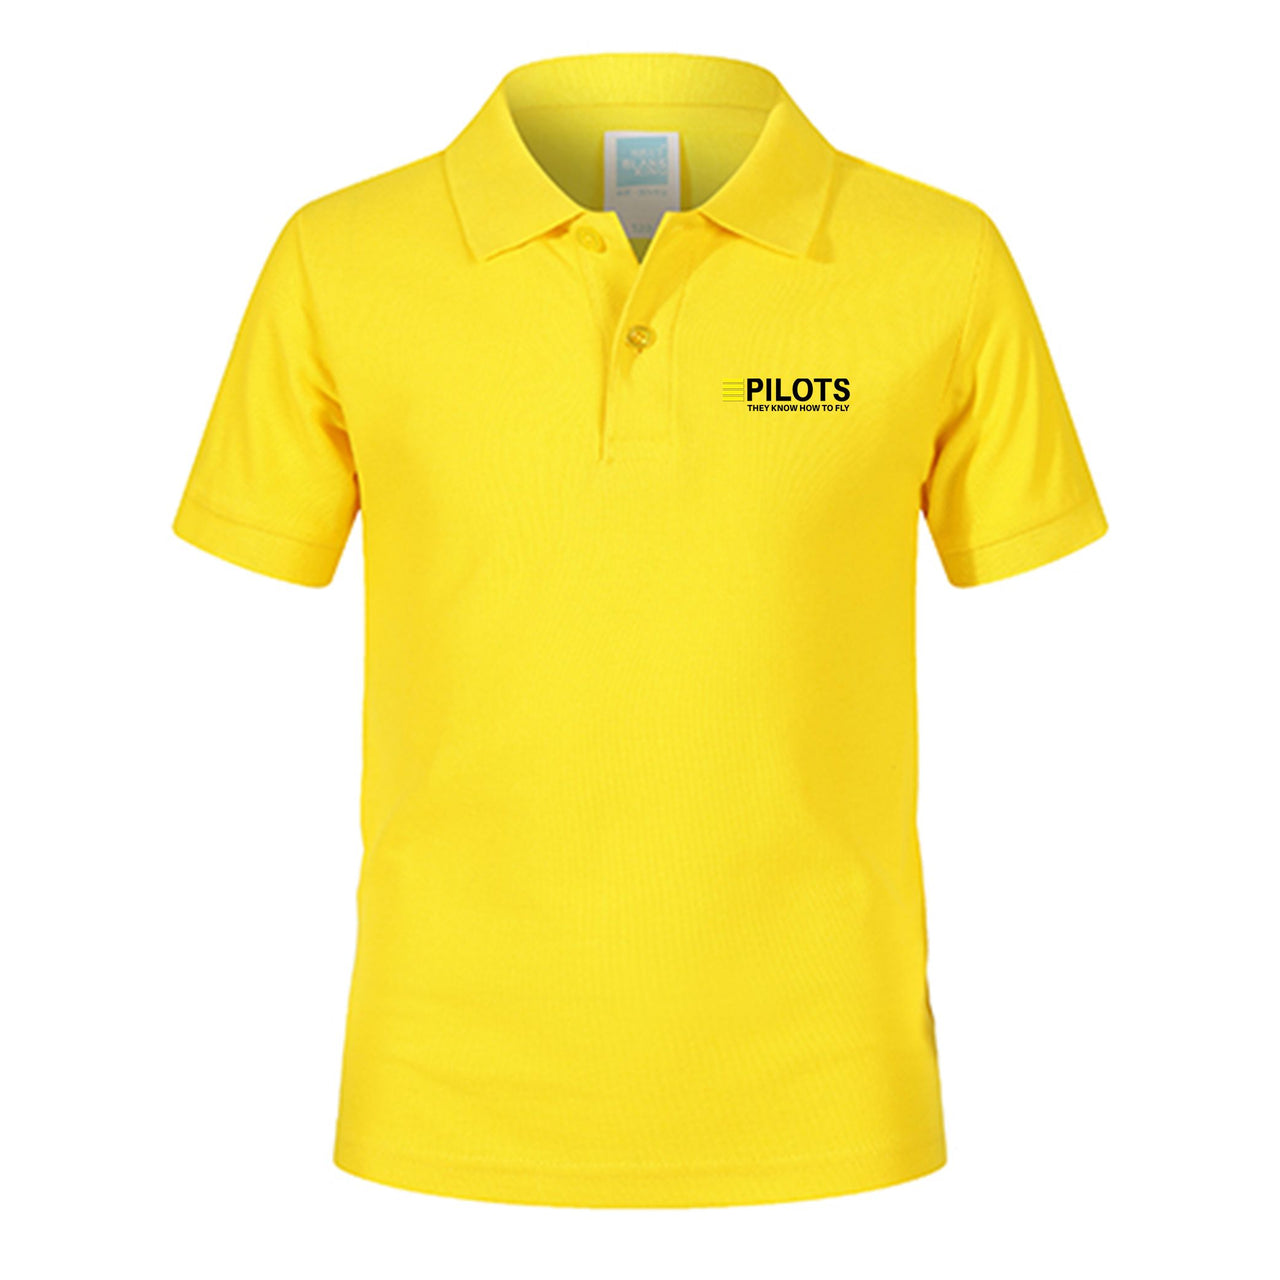 Pilots They Know How To Fly Designed Children Polo T-Shirts